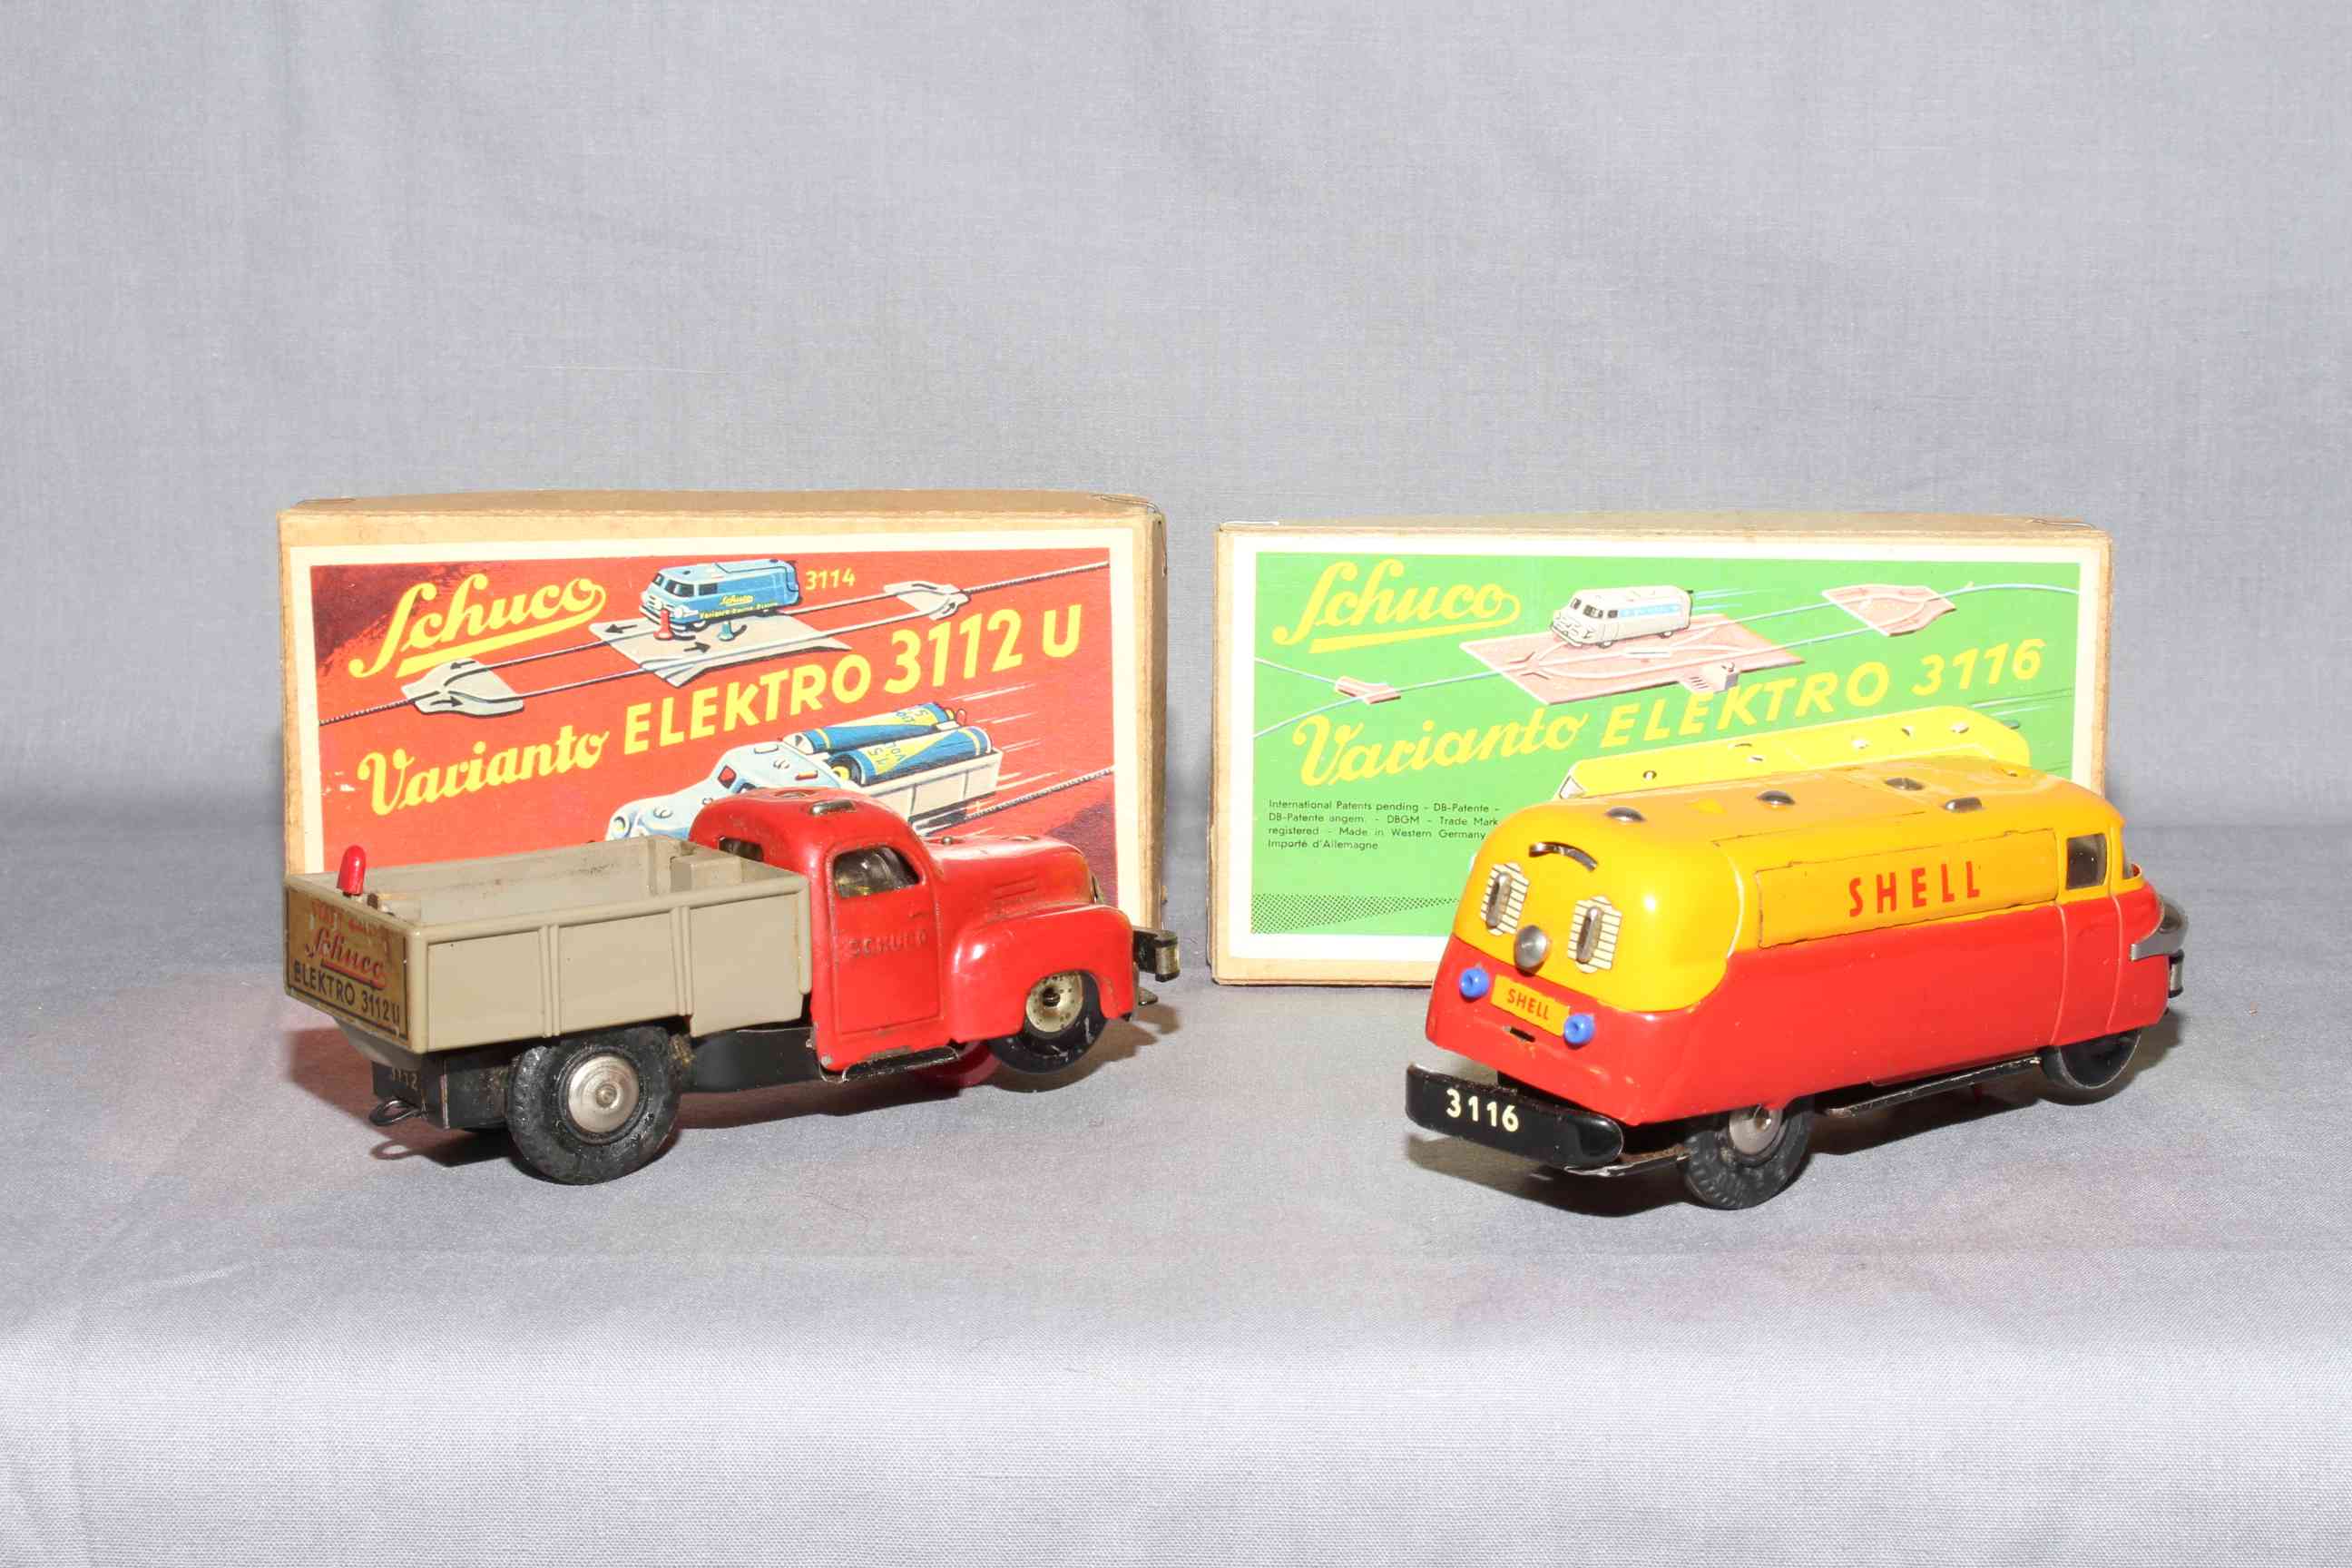 2 x Schuco Varianto Electro. Shell Tanker and Dropside Truck. - Image 2 of 2